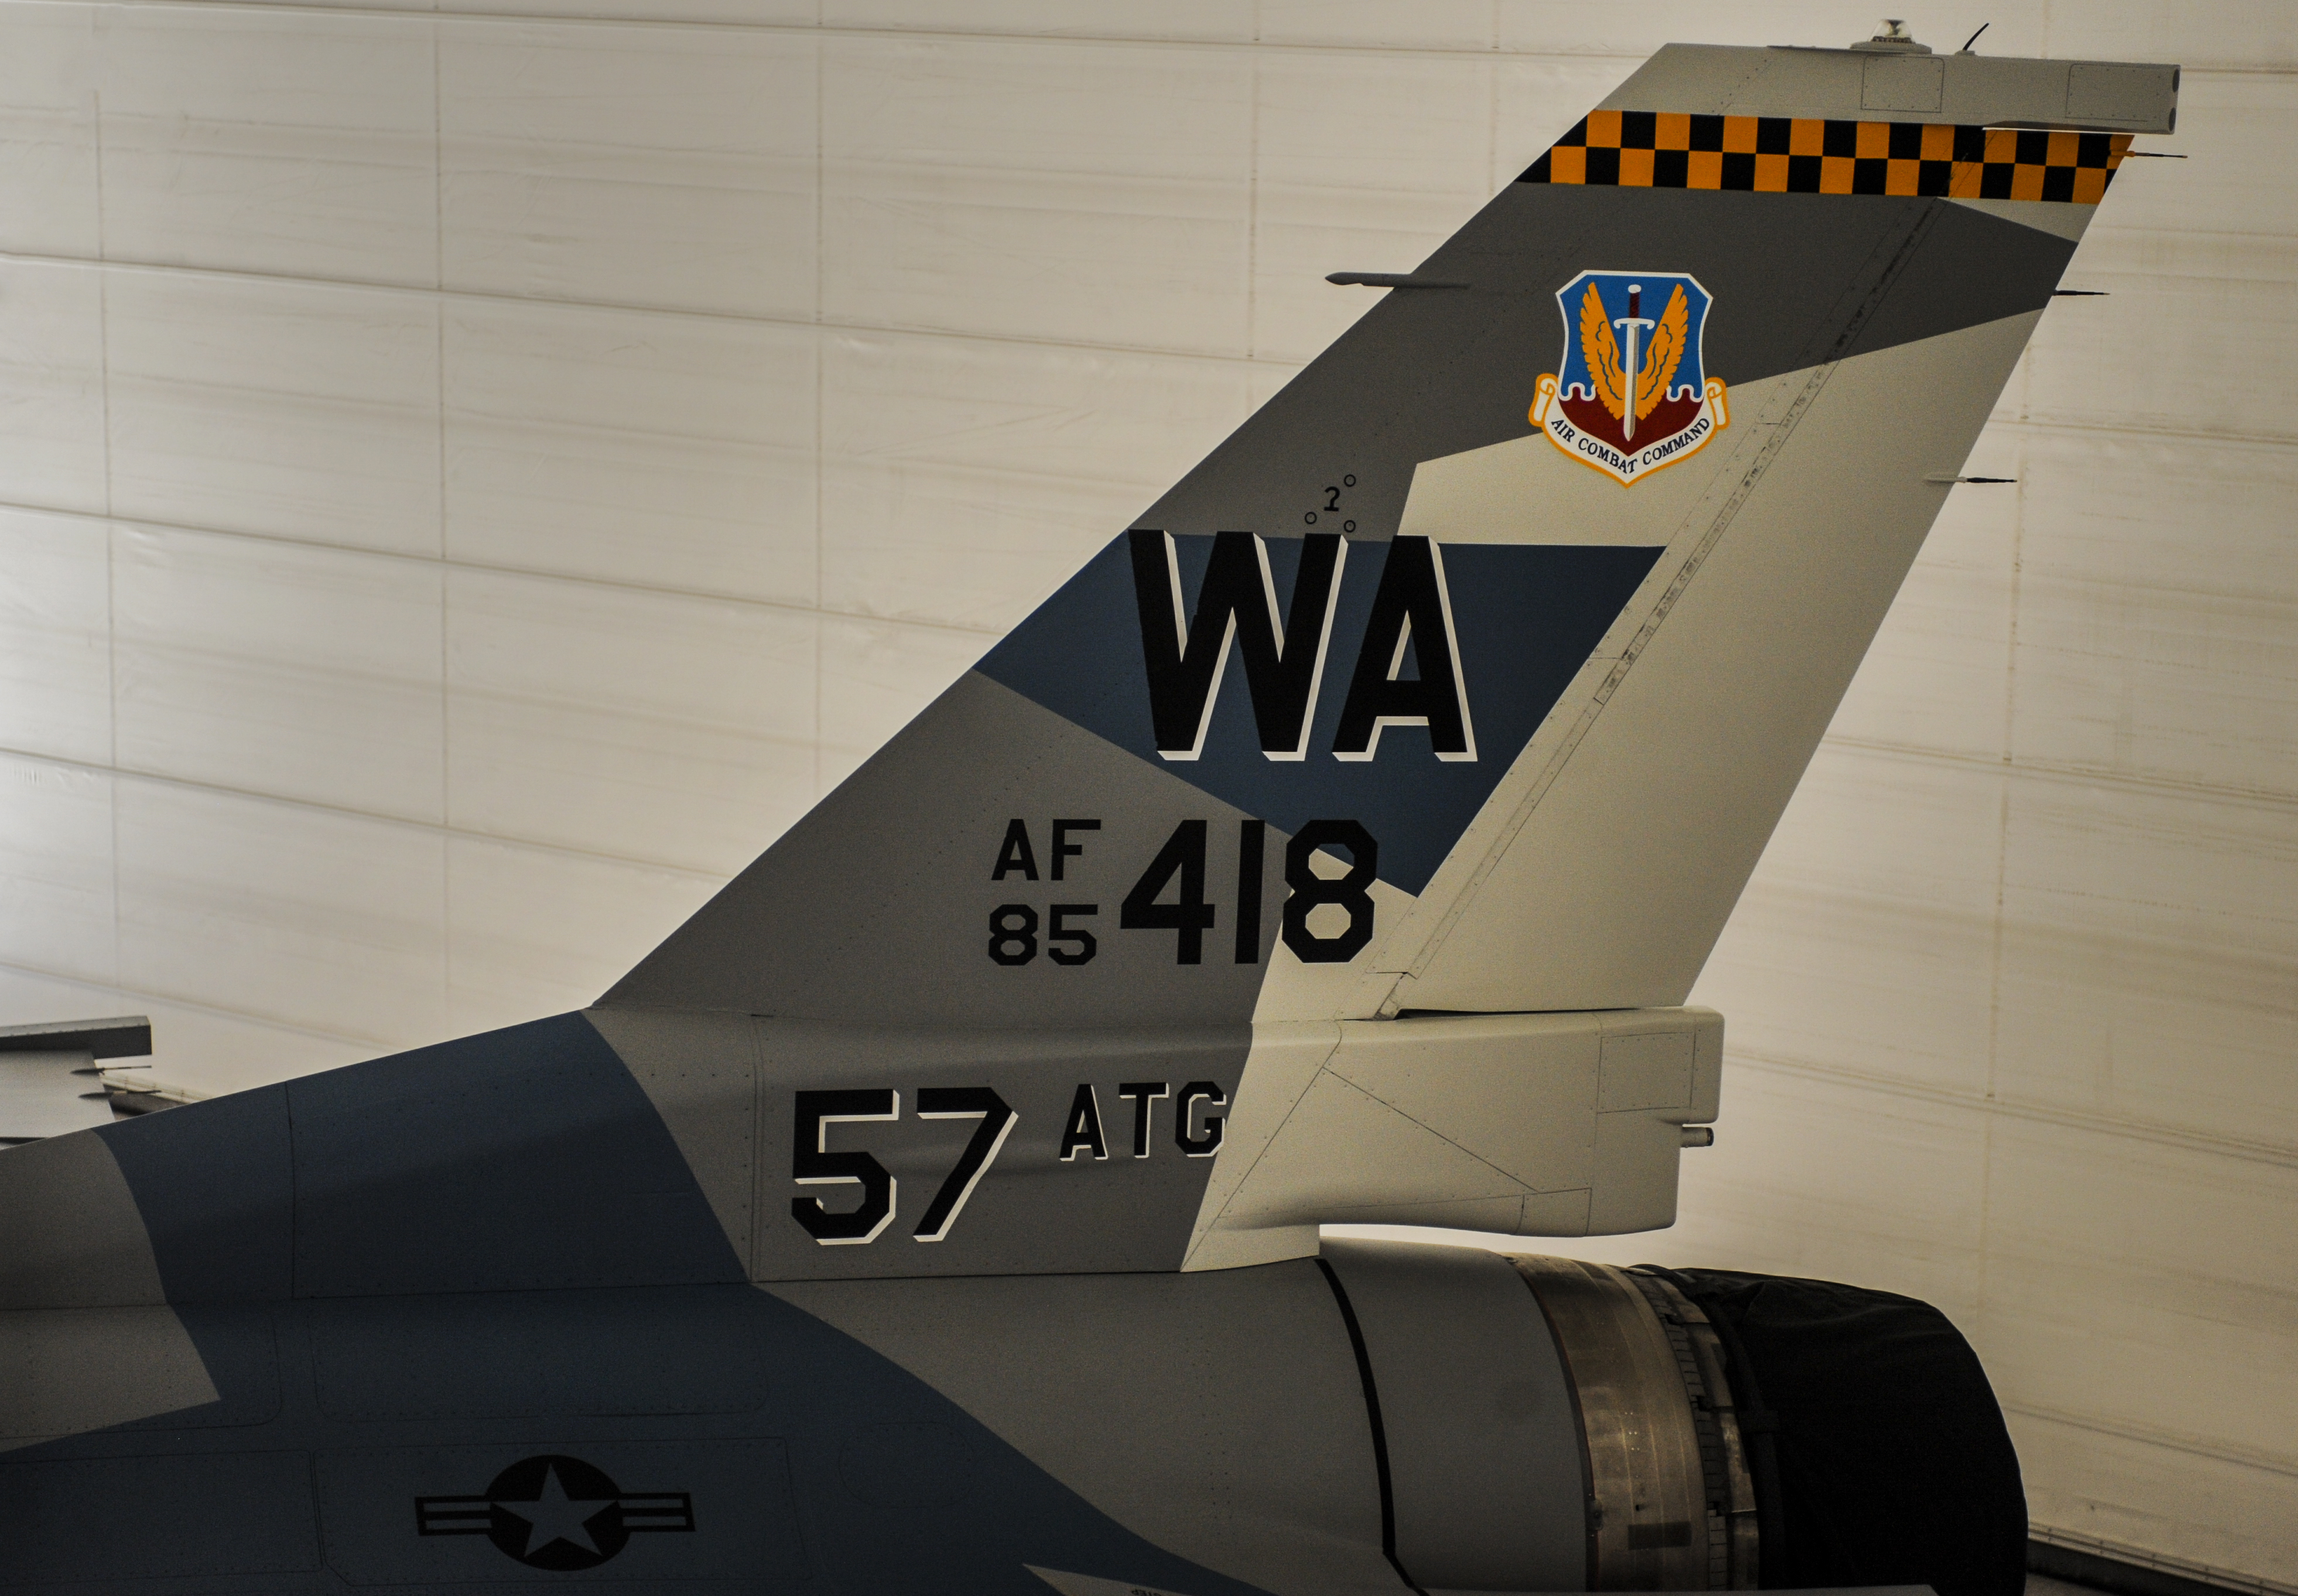 Check out the 64th Aggressor Squadron’s new paint scheme for its F-16.